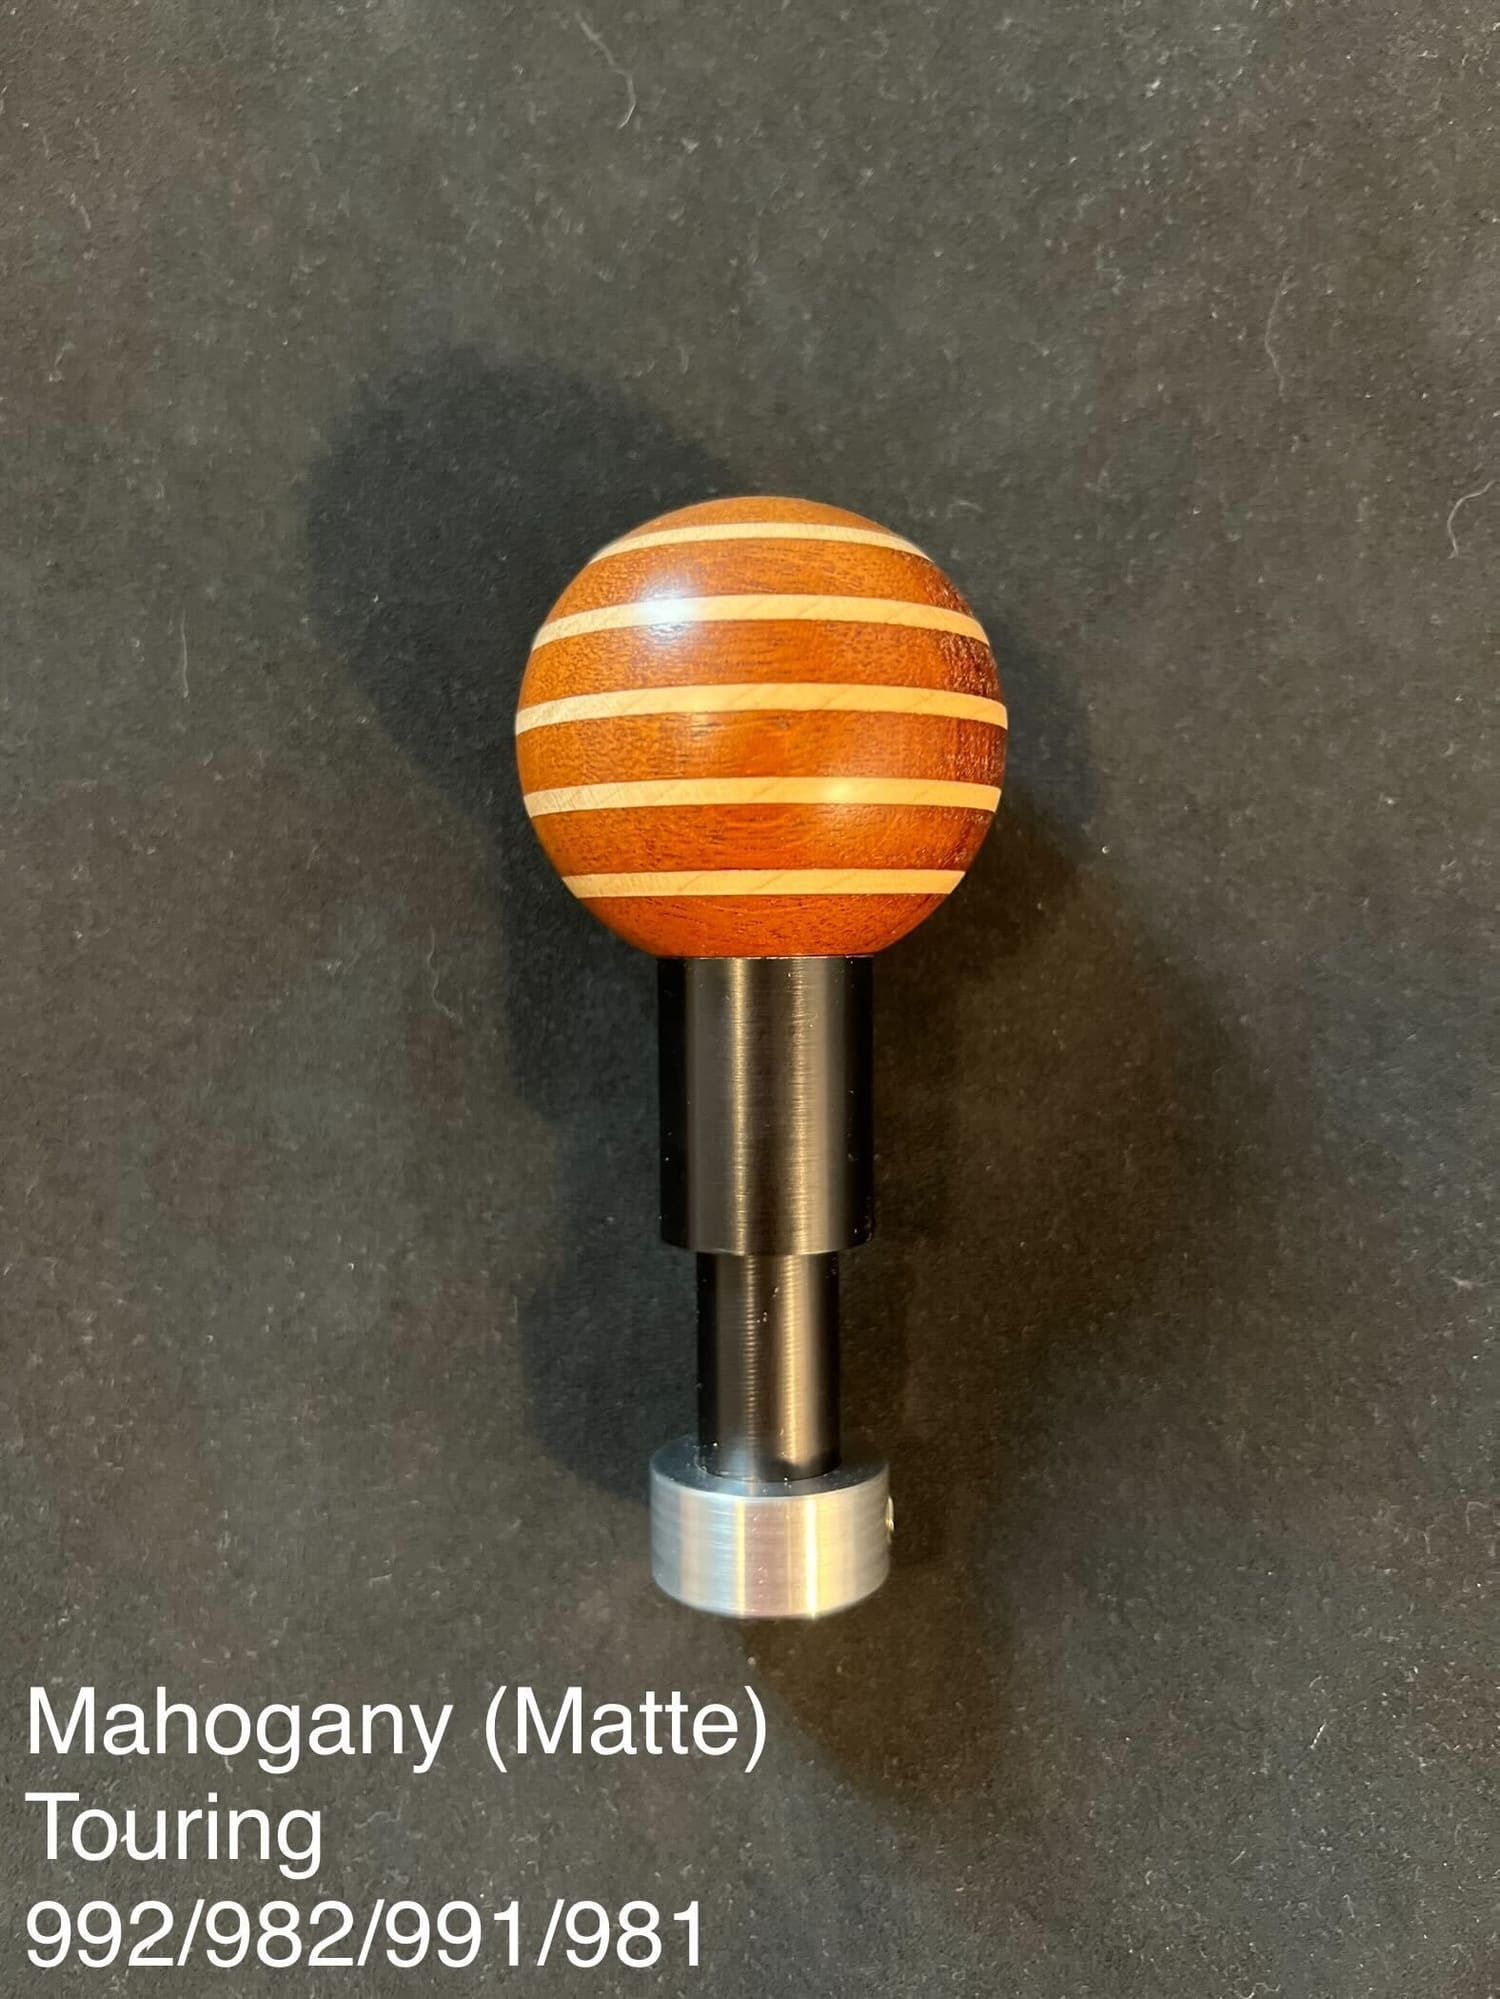 Interior/Upholstery - HERITAGE SHIFT KNOBS - STITCHTOSAMPLE - New - All Years  All Models - All Years  All Models - All Years  All Models - All Years  All Models - All Years  All Models - All Years  All Models - All Years  All Models - All Years  All Models - Brooklyn, NY 11225, United States